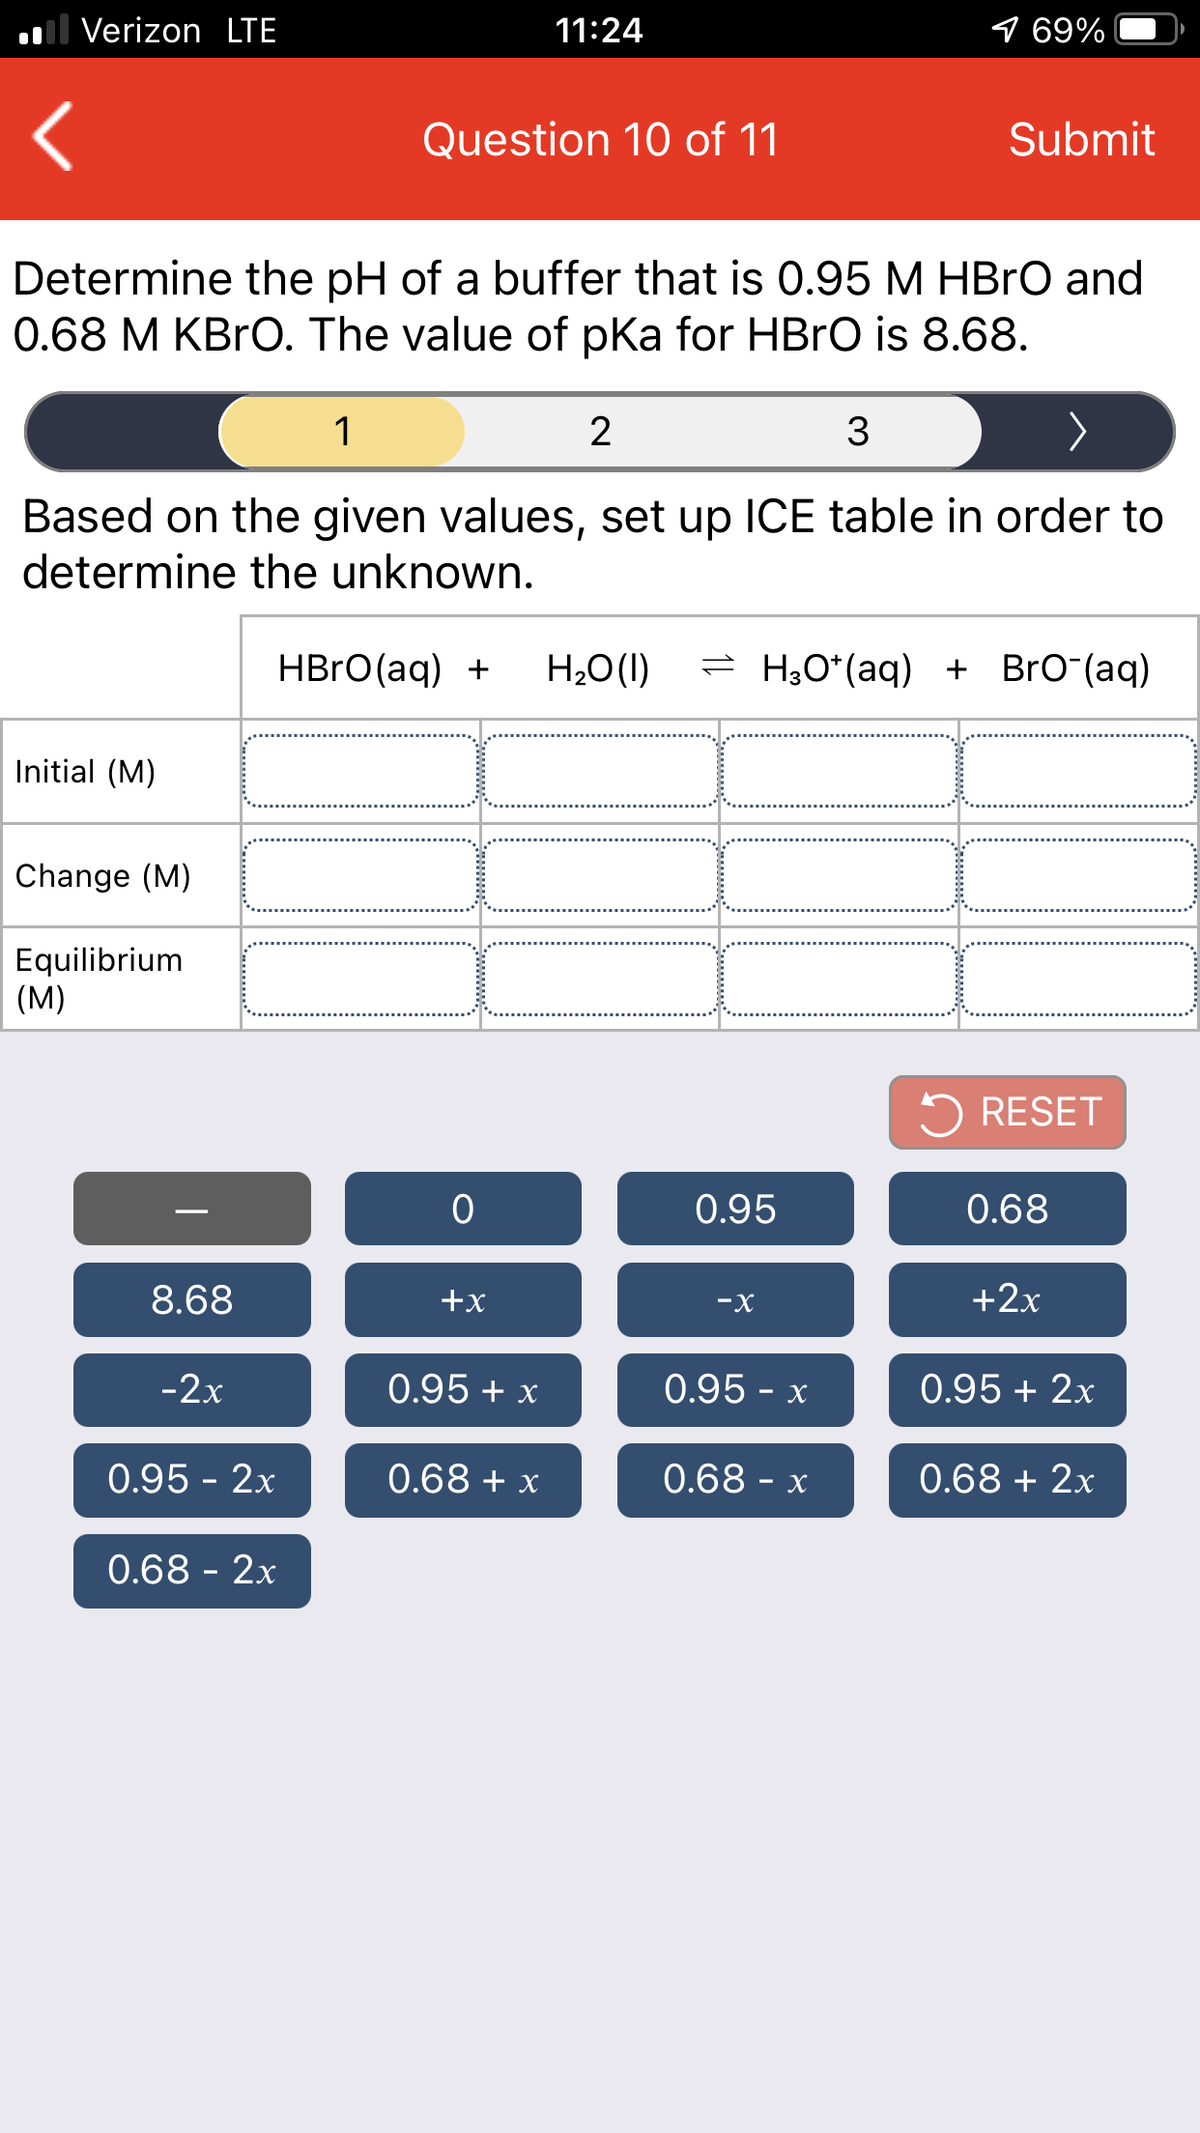 ol Verizon LTE
11:24
9 69%
Question 10 of 11
Submit
Determine the pH of a buffer that is 0.95 M HBRO and
0.68 M KBRO. The value of pka for HBRO is 8.68.
1
2
3
Based on the given values, set up ICE table in order to
determine the unknown.
HBRO(aq) +
H2O(1)
= H;O*(aq) + BrO (aq)
Initial (M)
Change (M)
Equilibrium
(M)
5 RESET
0.95
0.68
8.68
+x
-X
+2x
-2x
0.95 + x
0.95 - x
0.95 + 2x
0.95 - 2x
0.68 + x
0.68 - x
0.68 + 2x
0.68 - 2x
